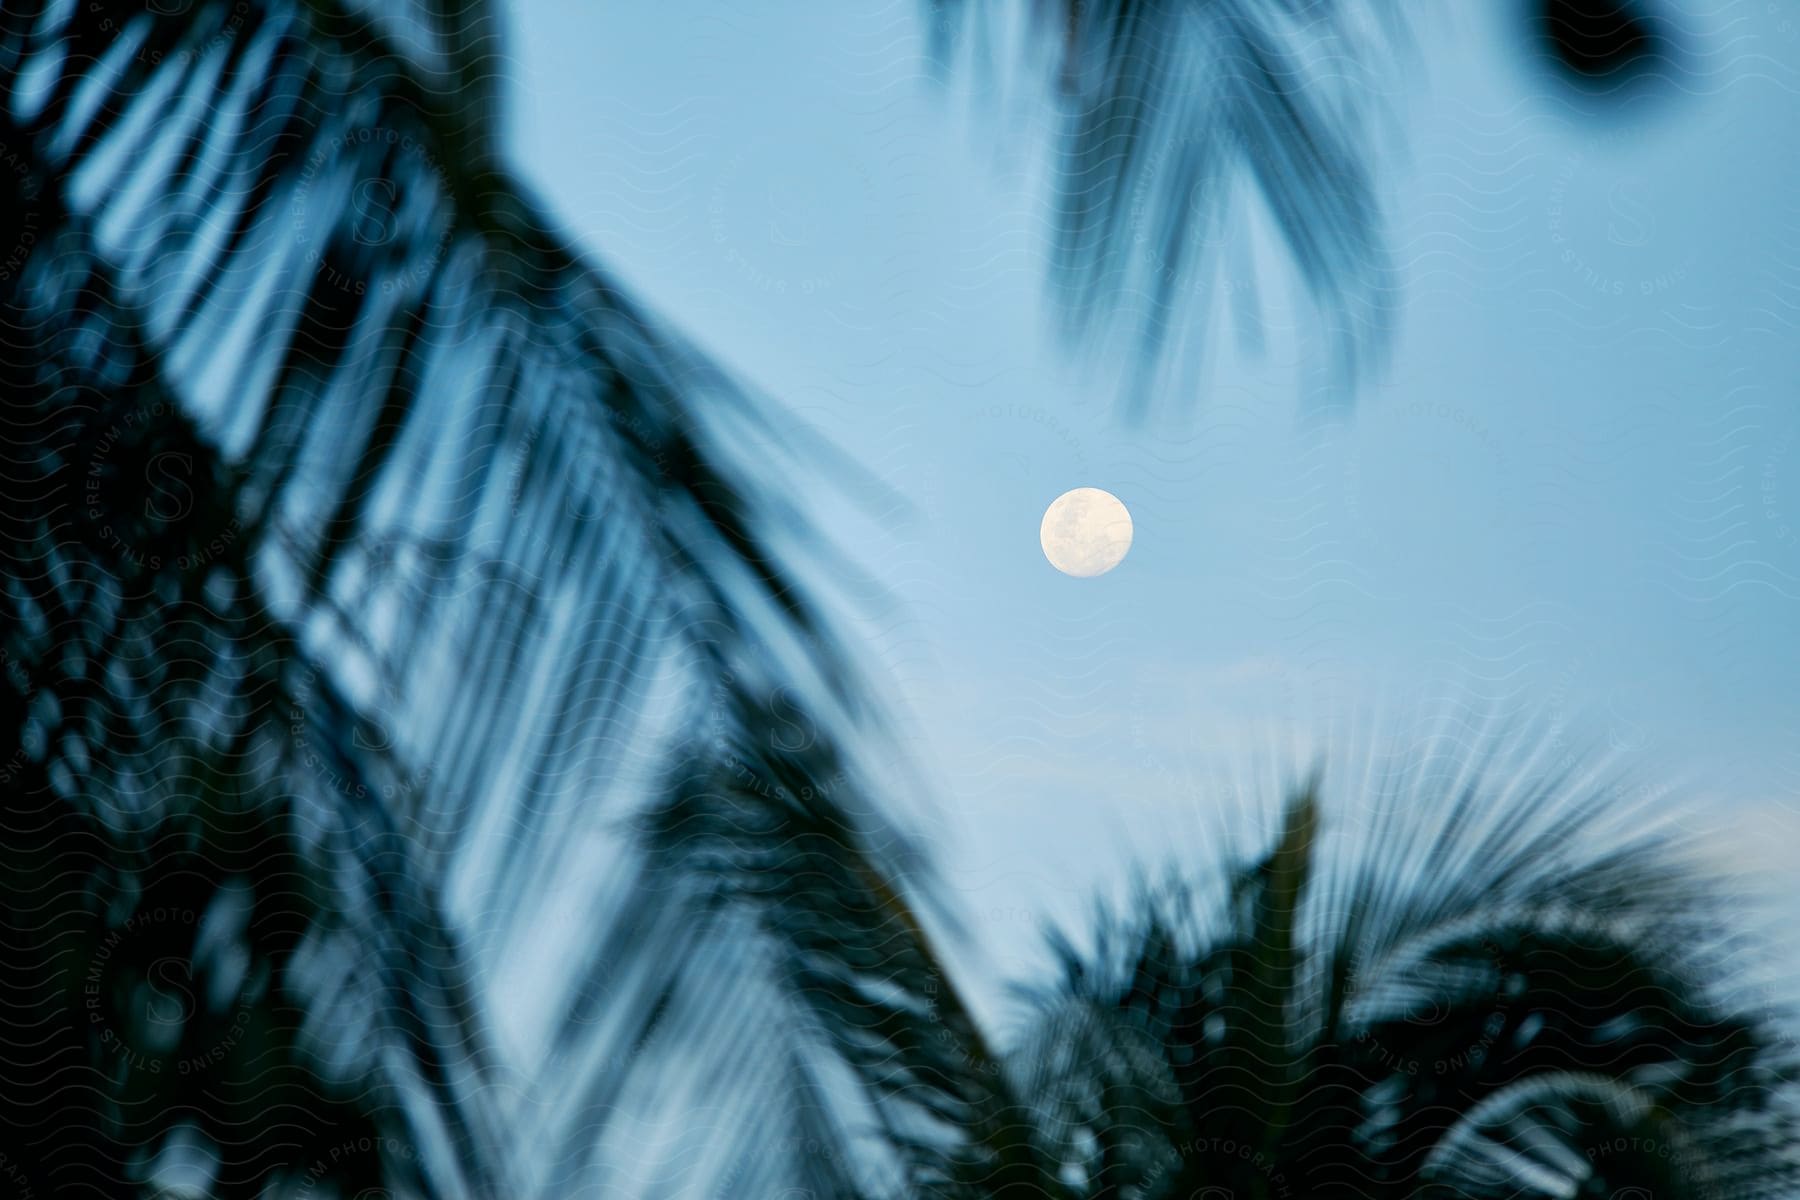 Landscape with a full moon above palm trees